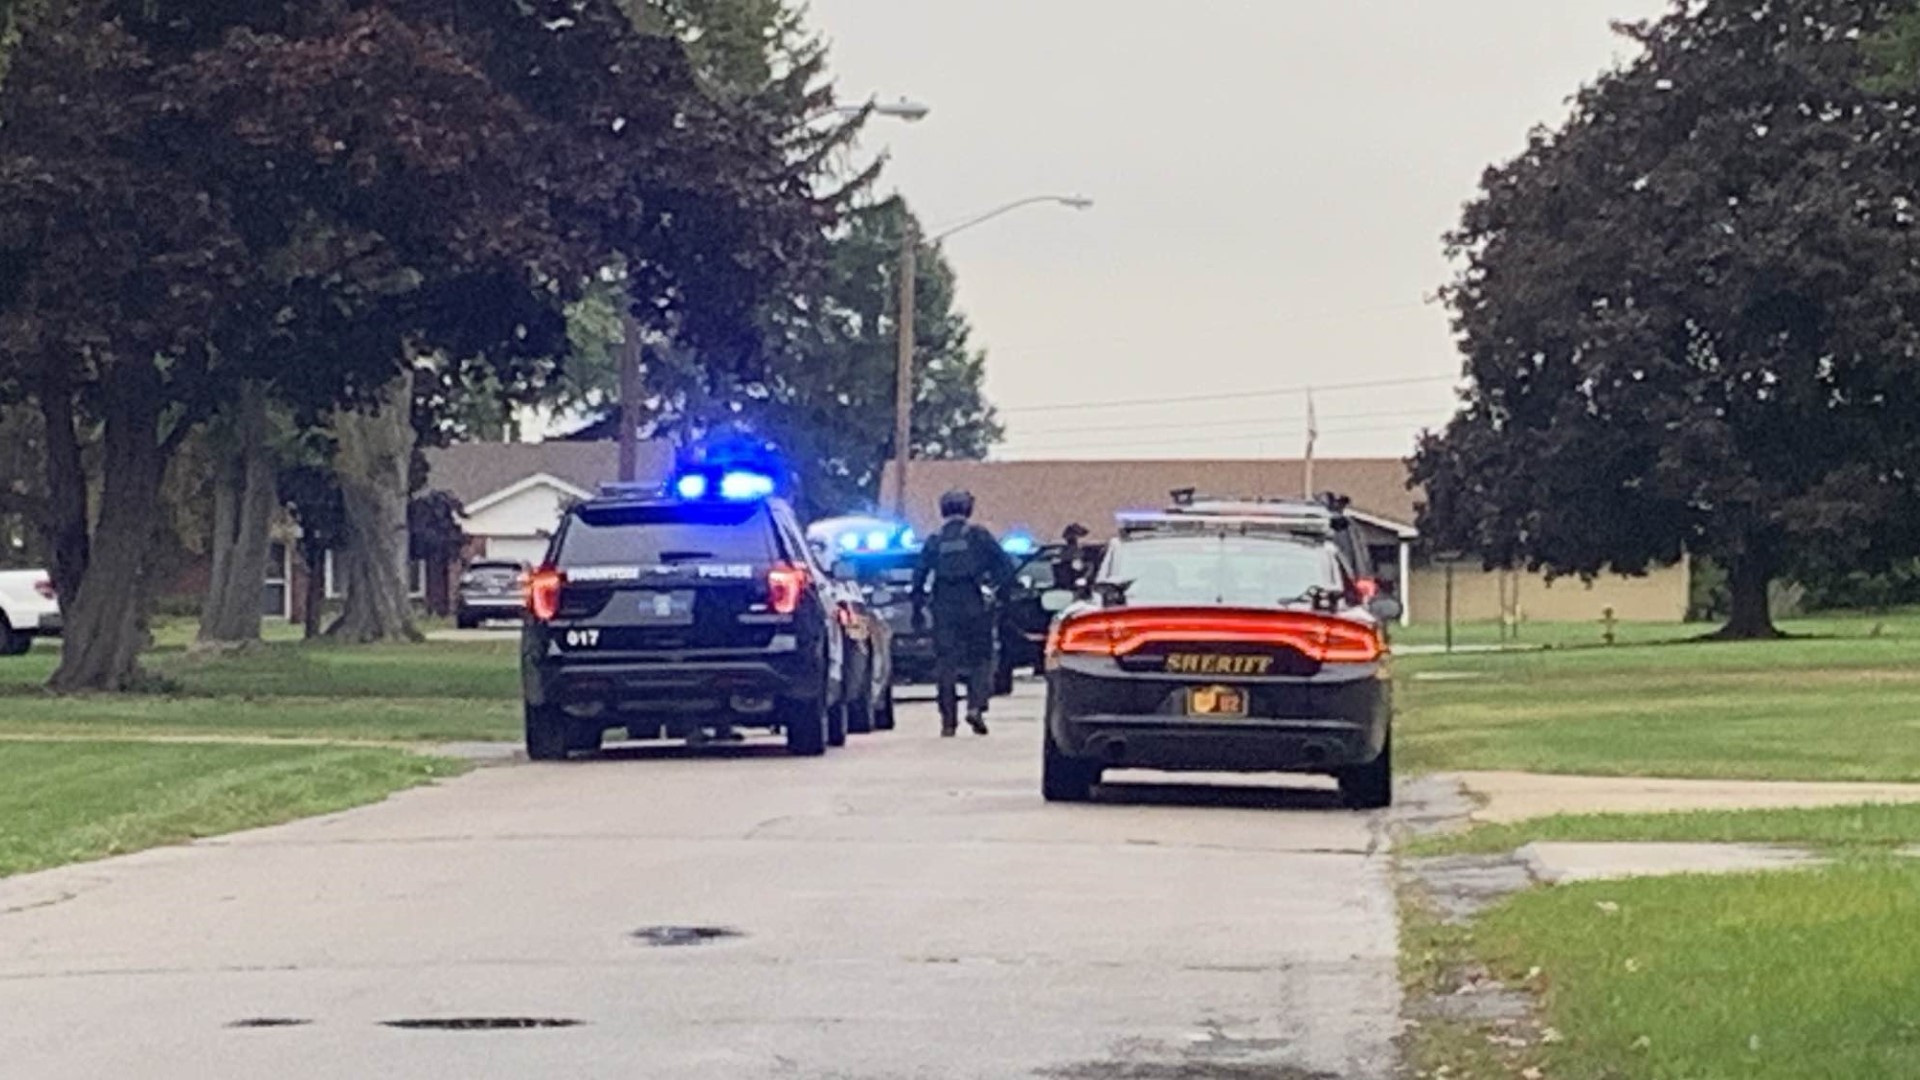 Video provided to WTOL 11 by a Swanton resident shows authorities engaged in a standoff Wednesday afternoon.